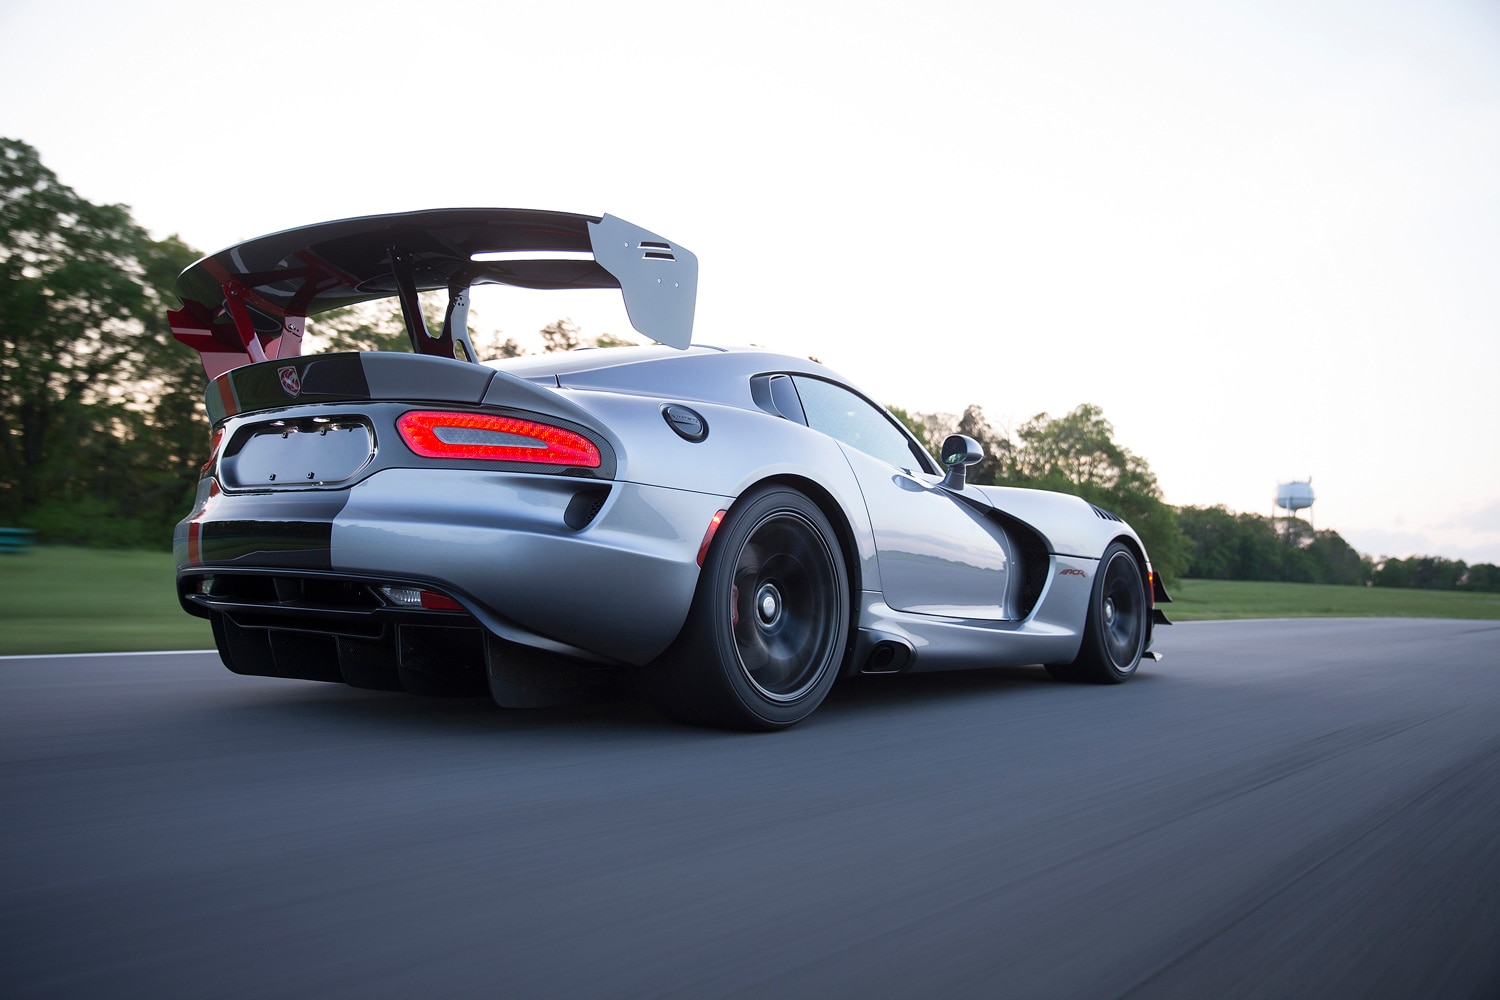 Rear angle of 2017 Dodge Viper ACR on racetrack